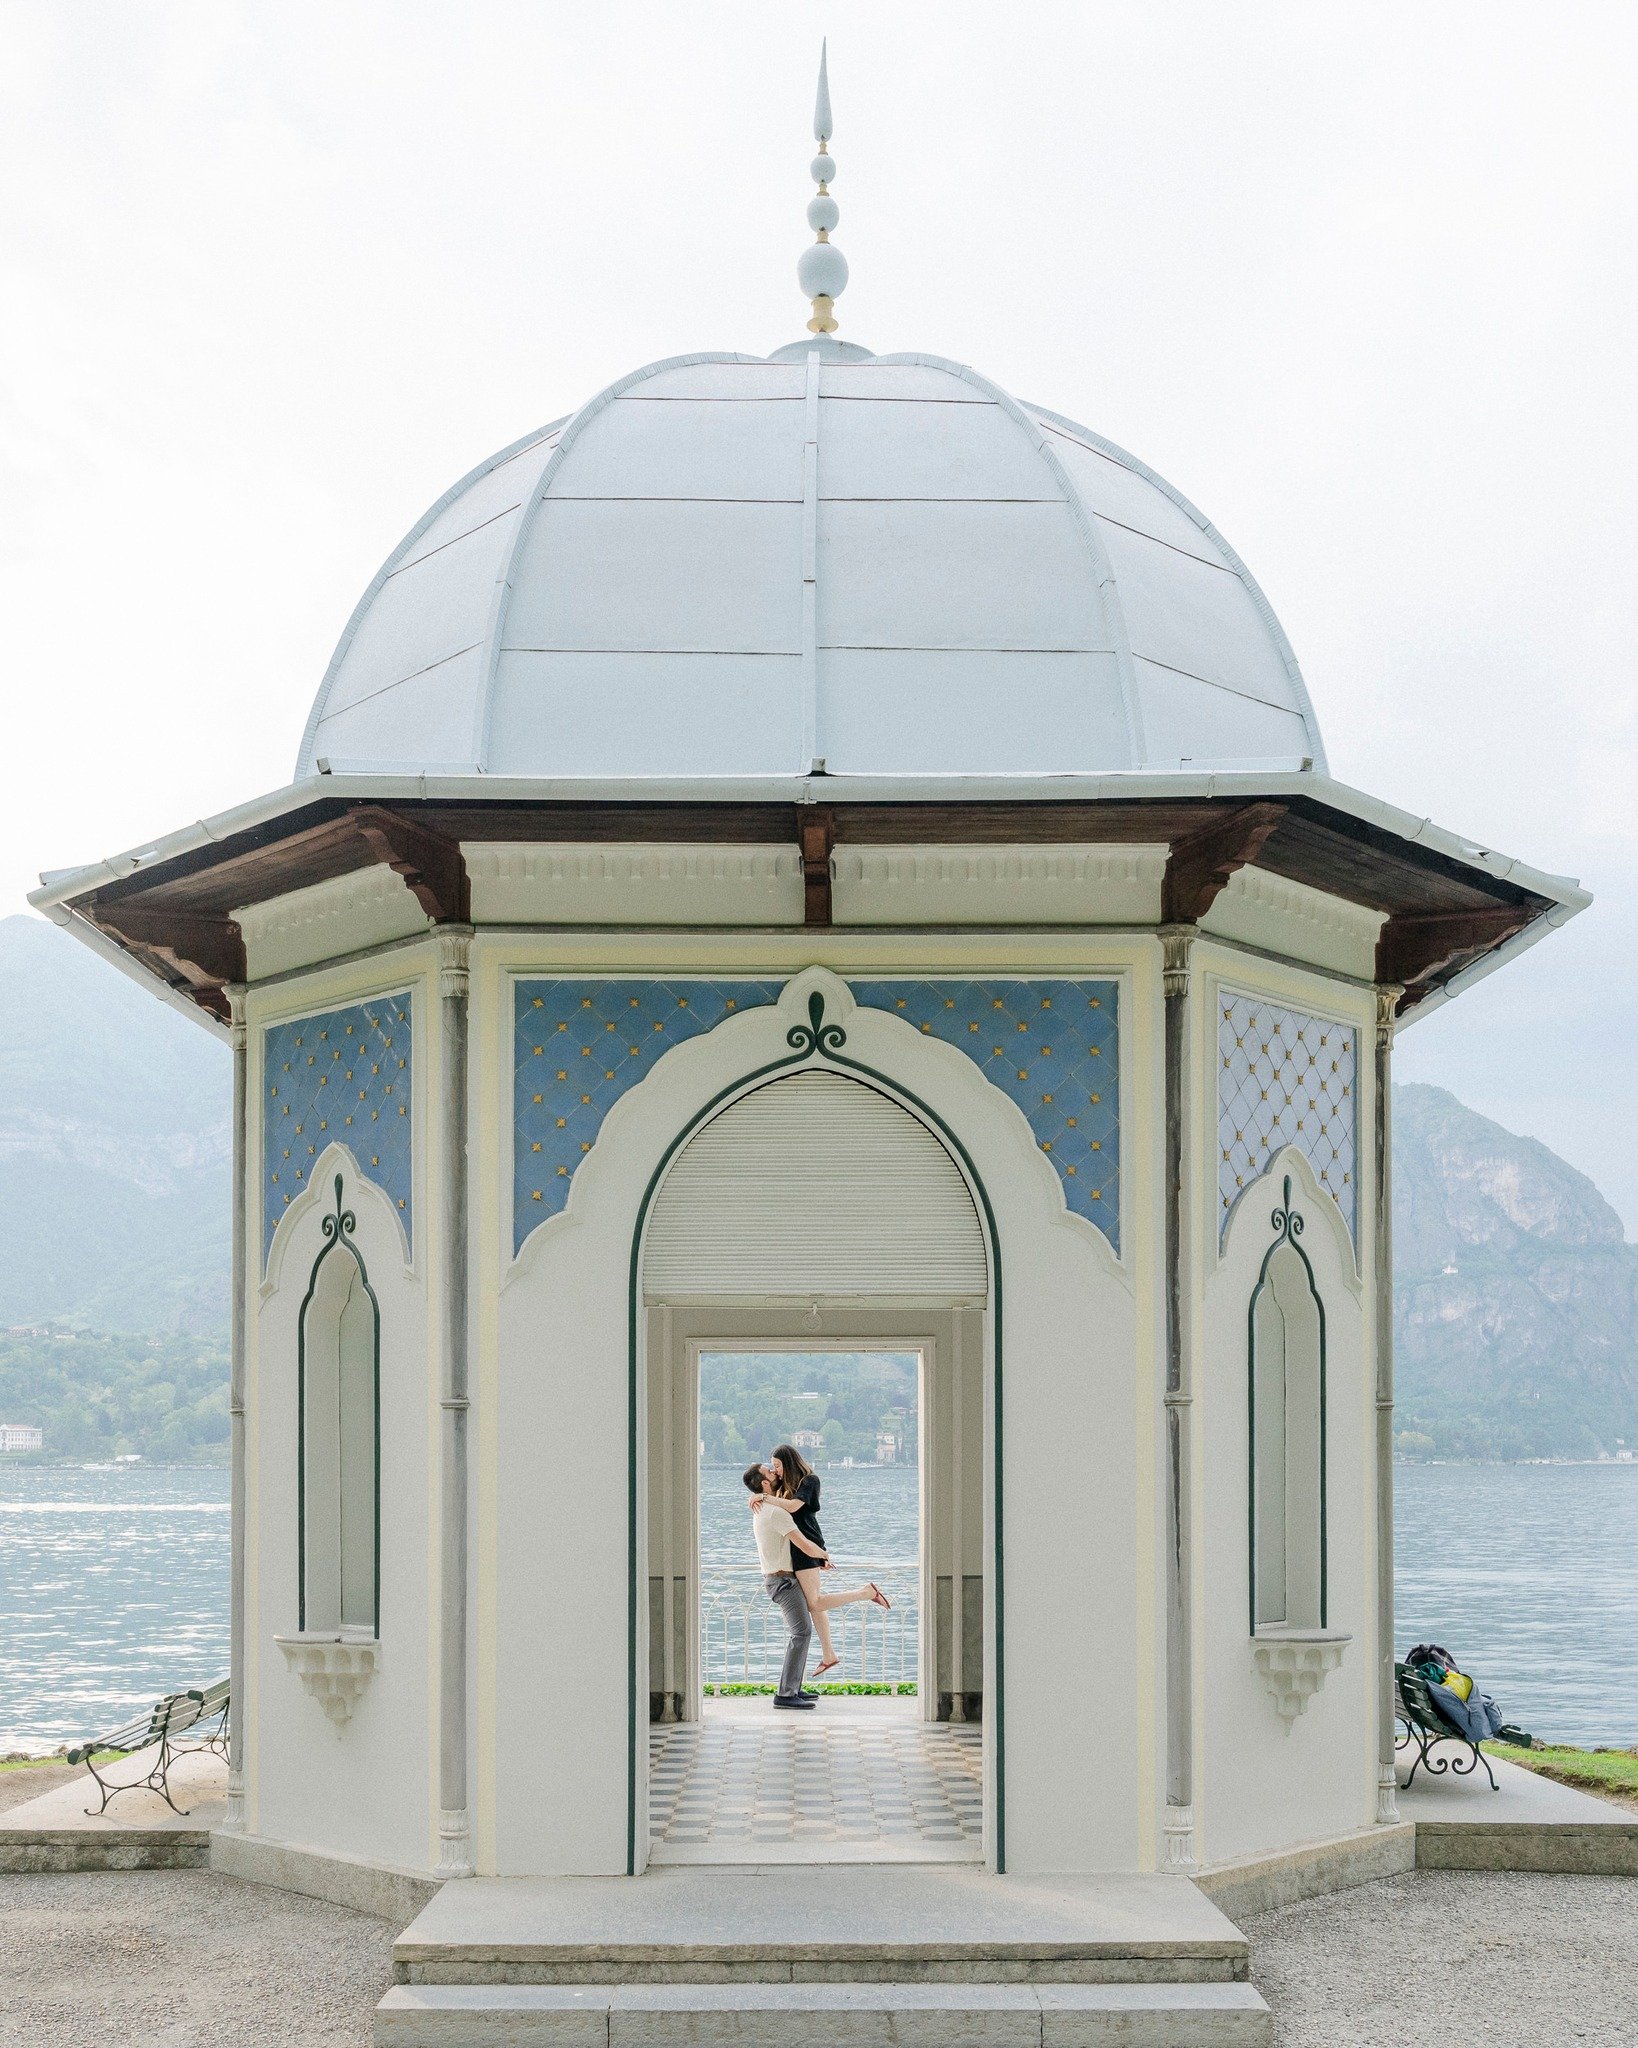 A magical wedding proposal at the enchanting Villa Melzi in Bellagio, Lake Como.
Love is in the air and romance is all around, a picturesque setting and timeless elegance for your unforgettable engagement.

.
..
.
.
.
.
..
.
.
@giardinidivillamelzi 
